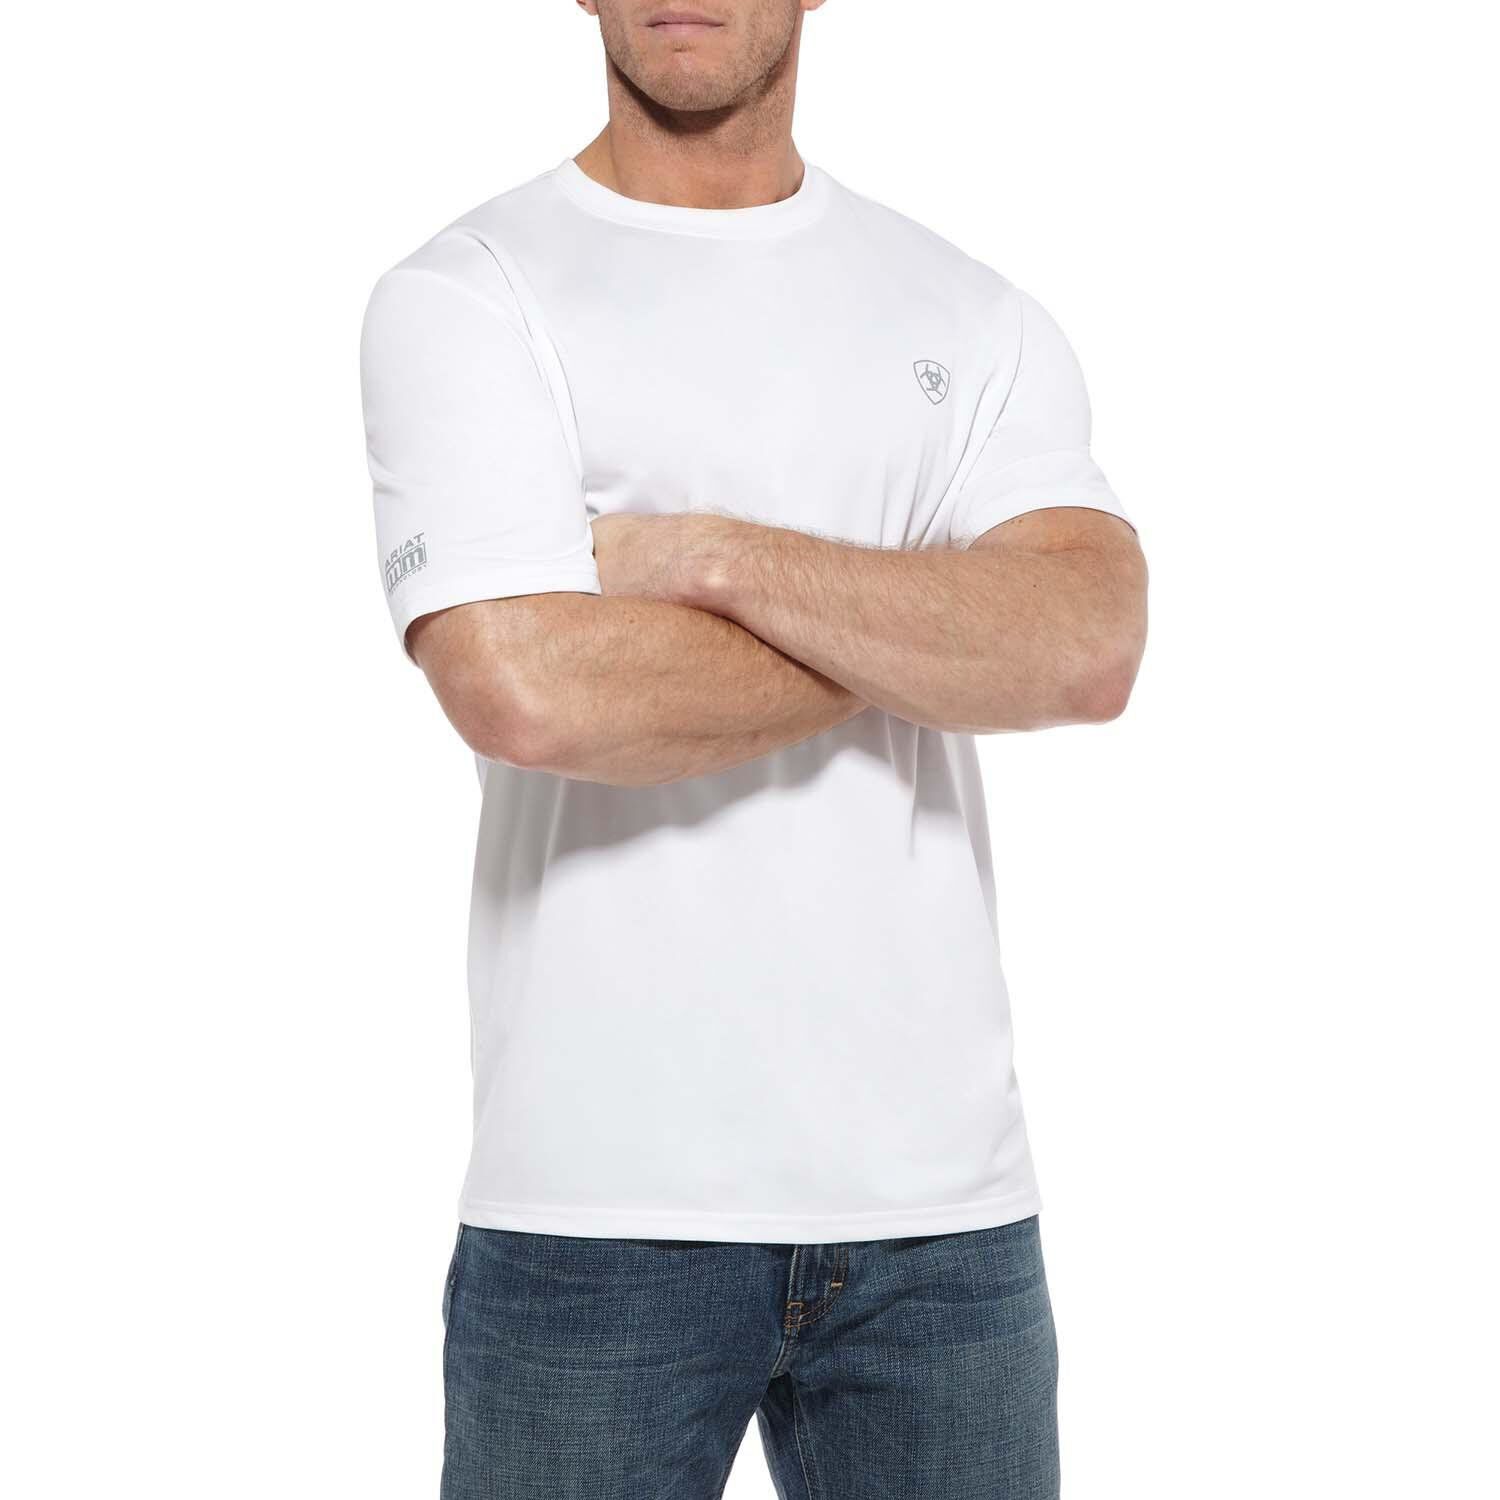 T-shirts with Tekmet